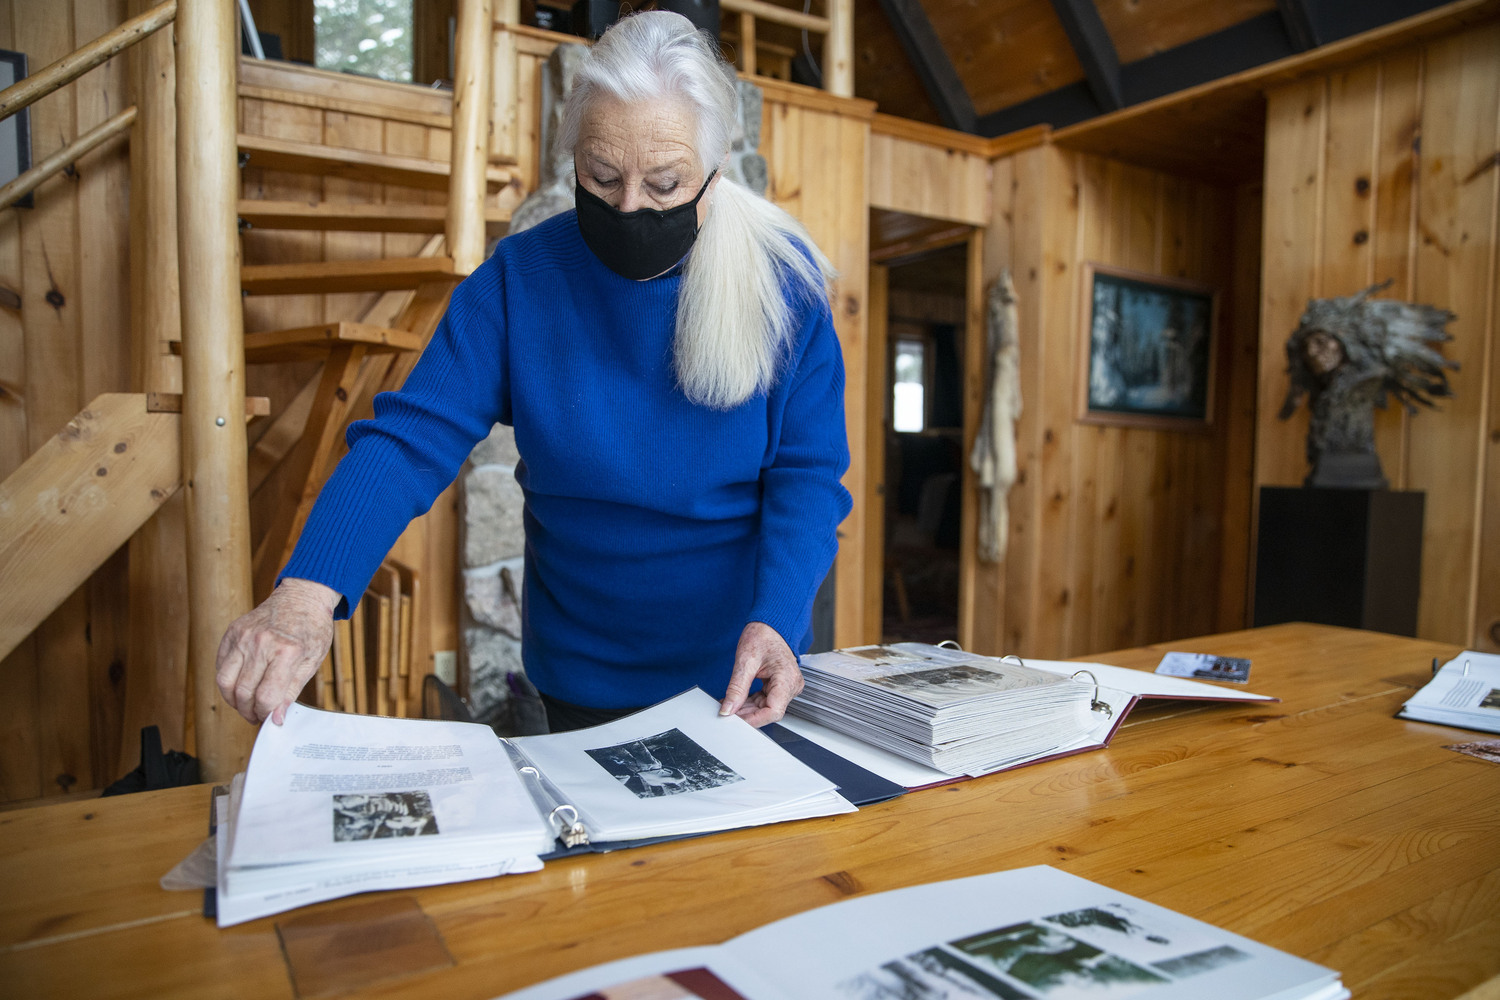 At her cabin, Leddy looked through photos books stuffed with images of their deep Gunflint Trail history.